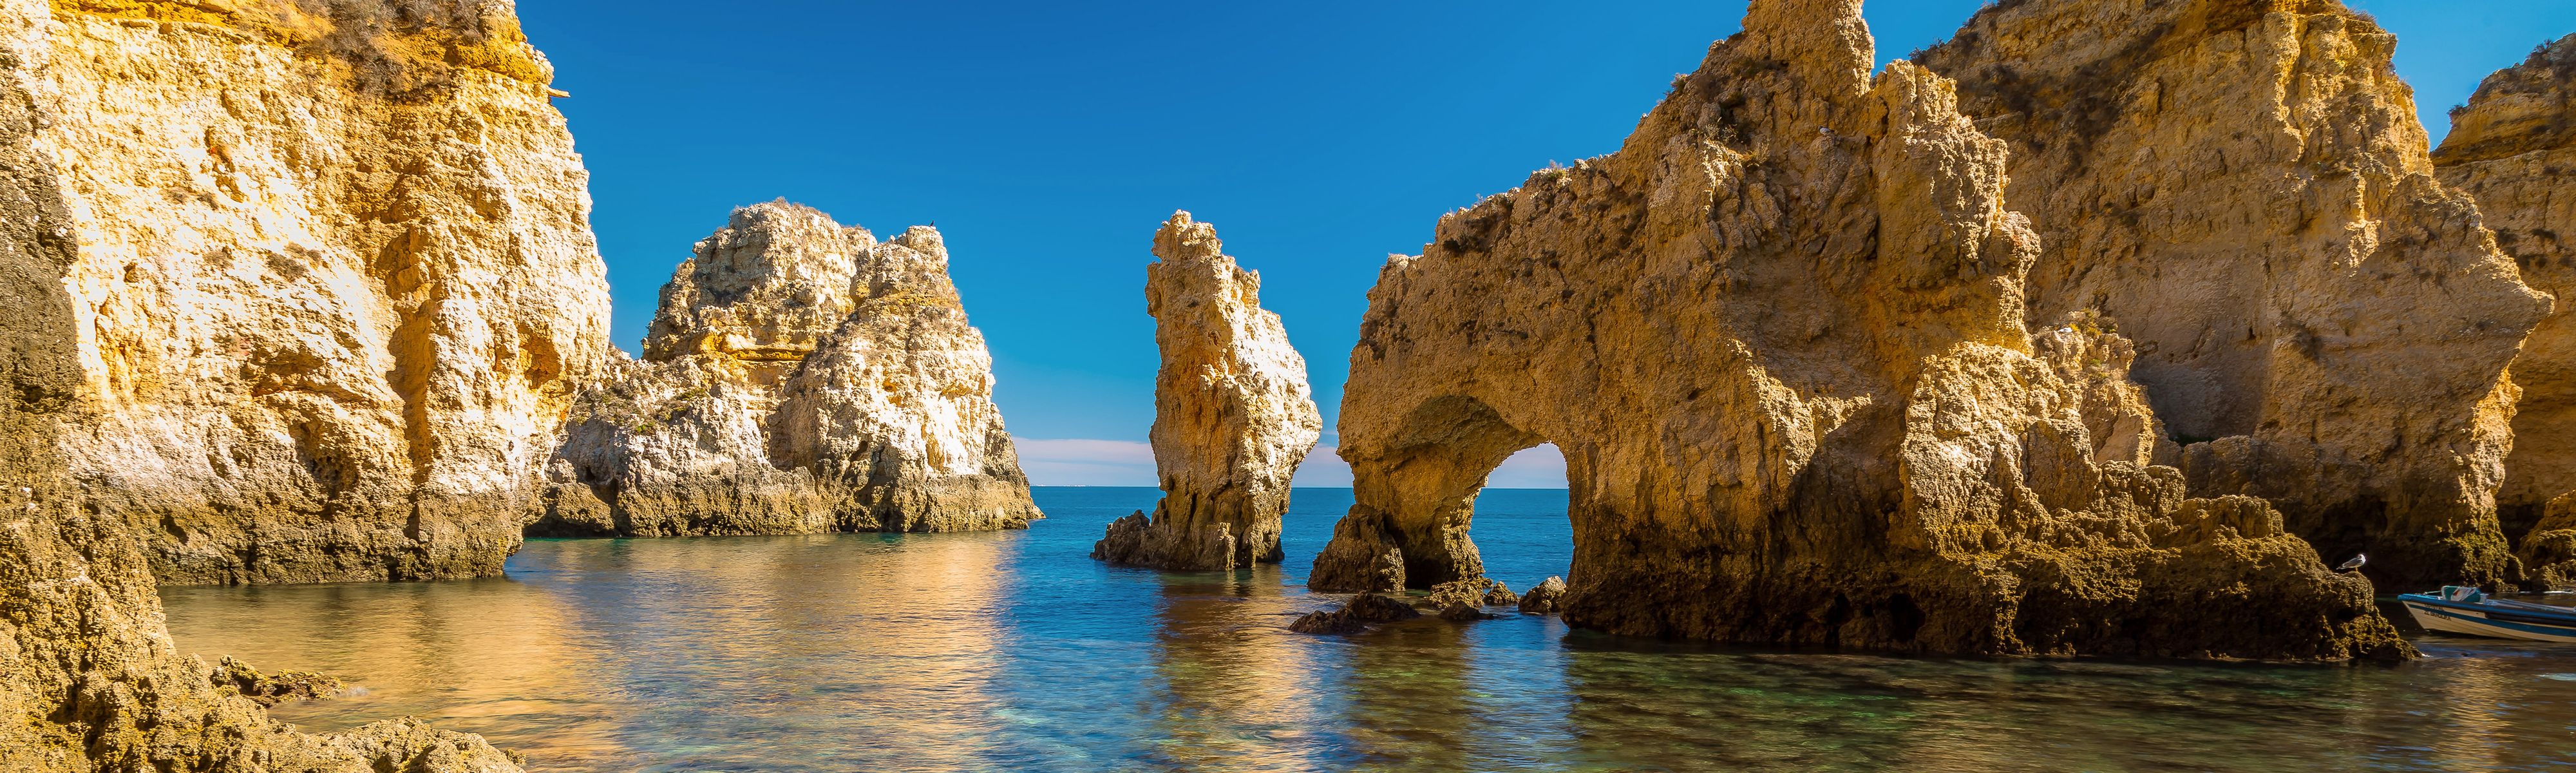 caves sitting in the water in lagos portugal